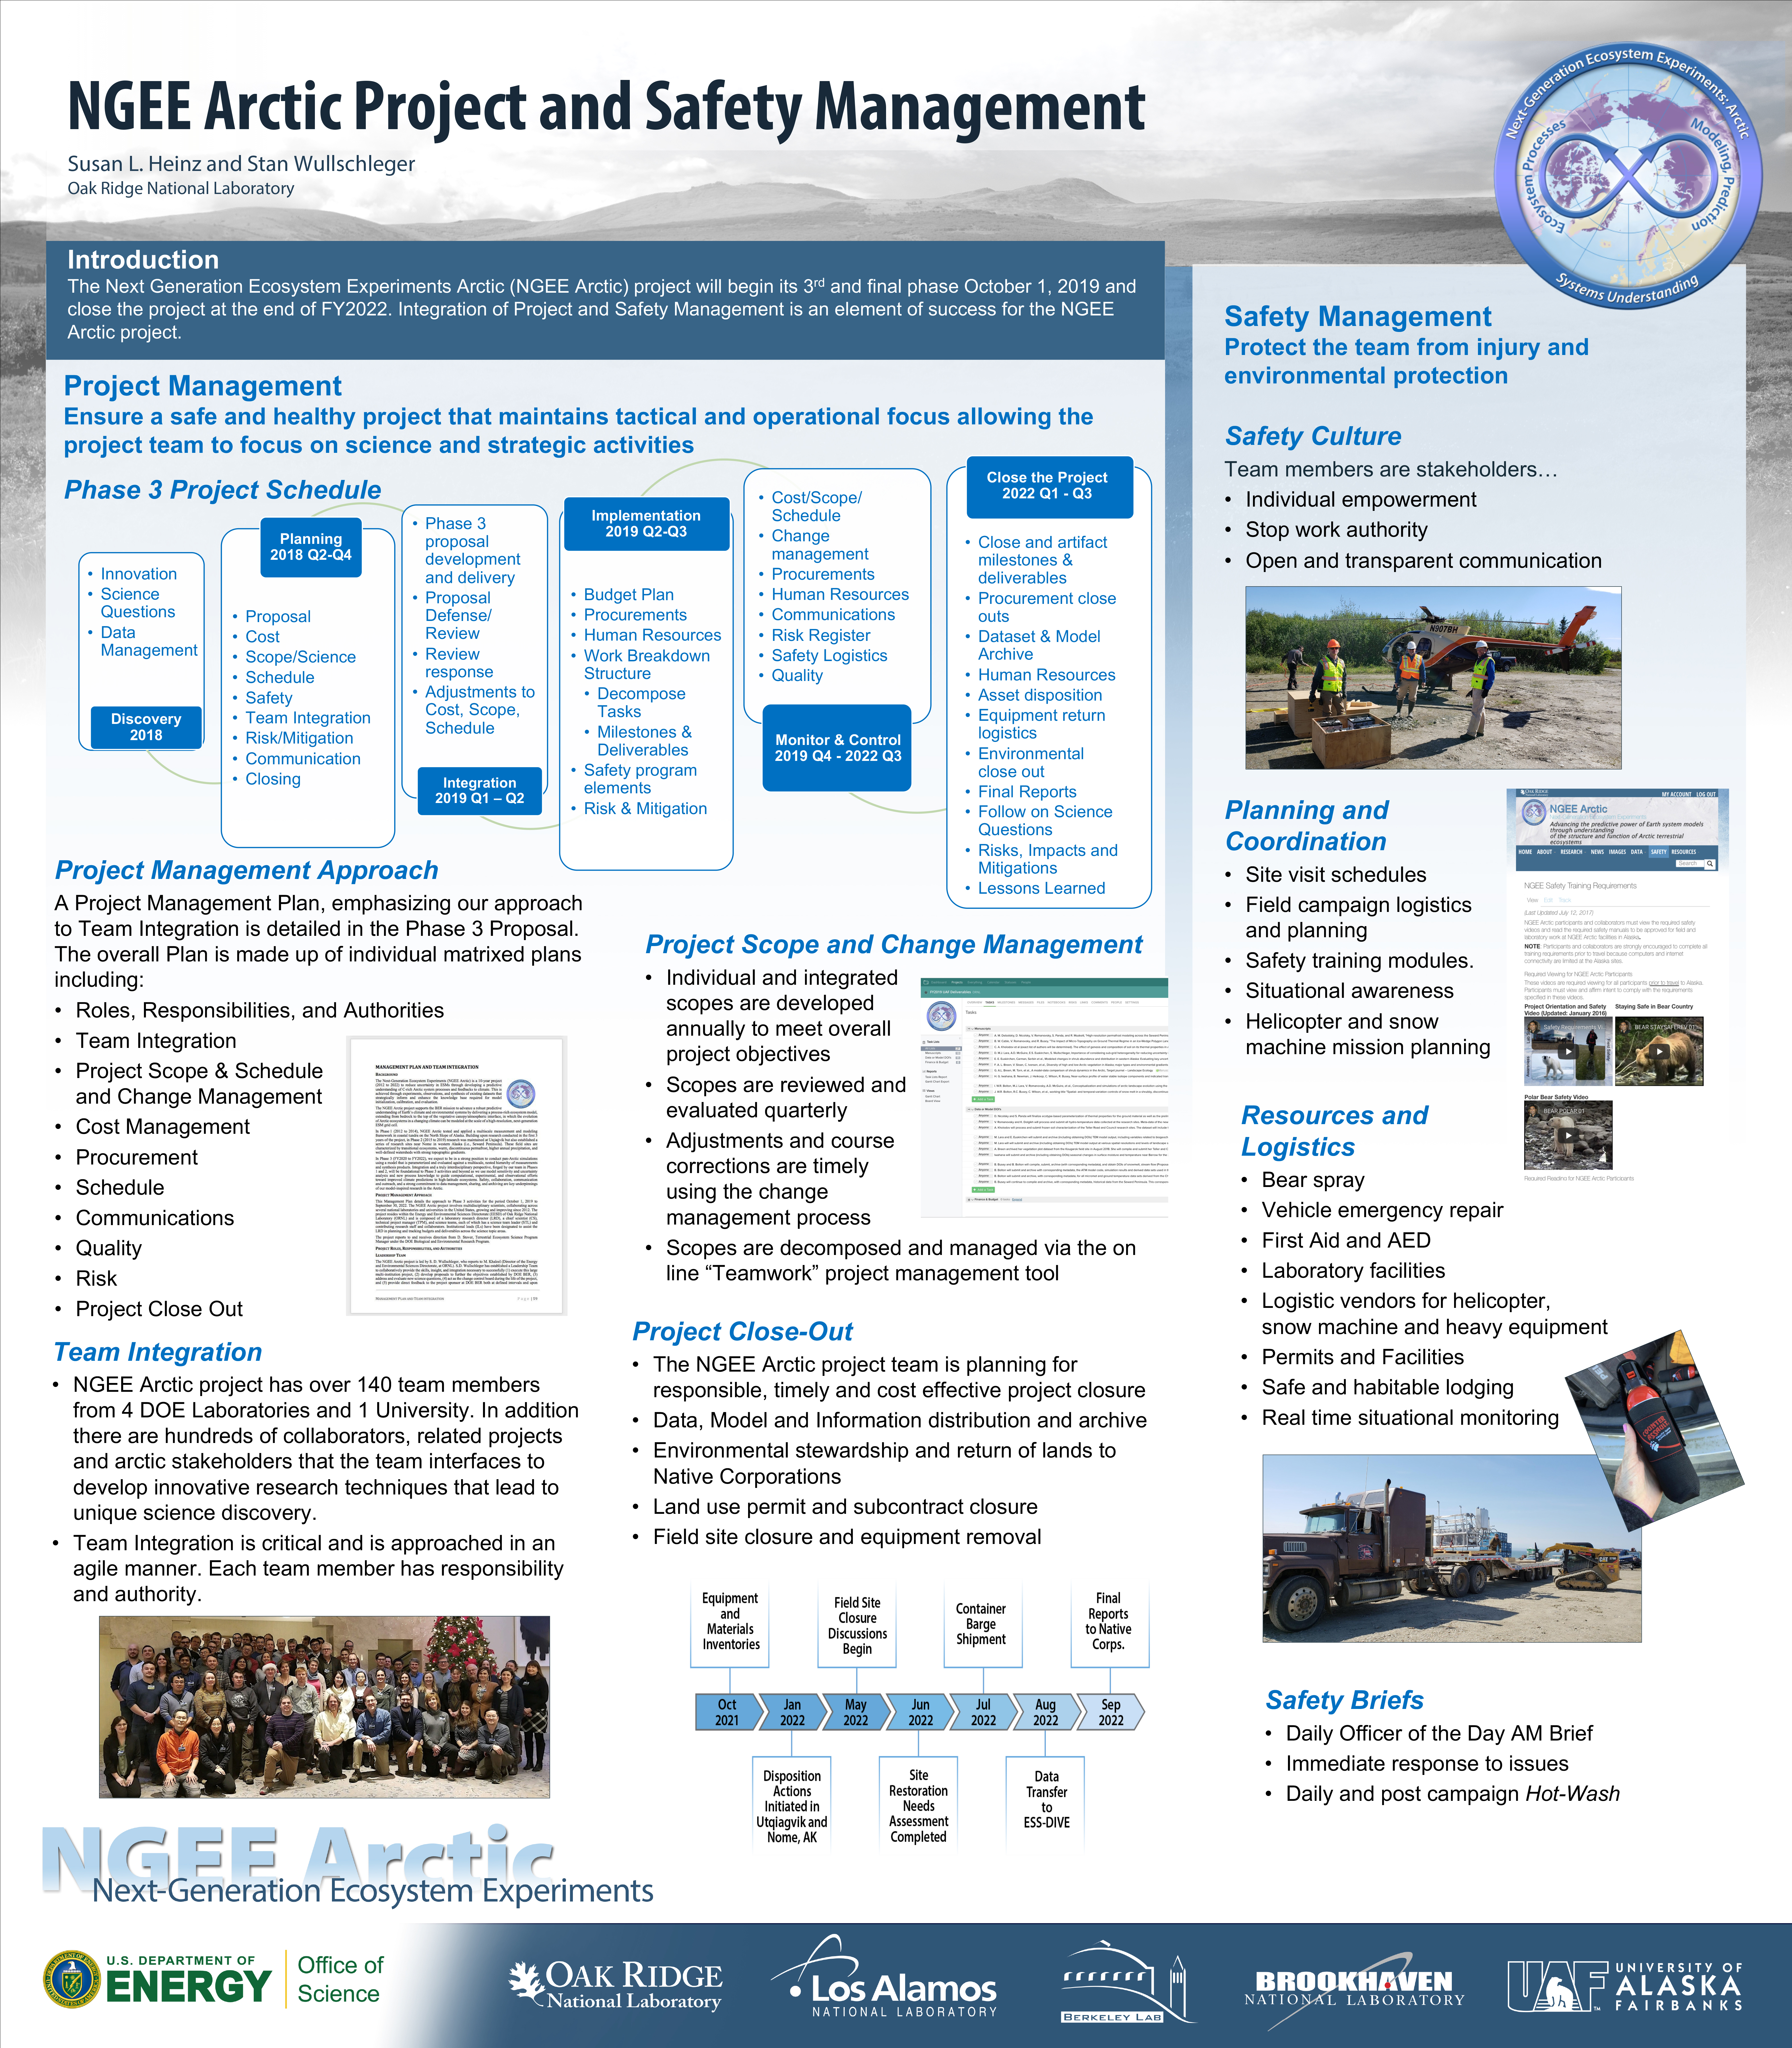 NGEE Arctic Project and Safety Management poster